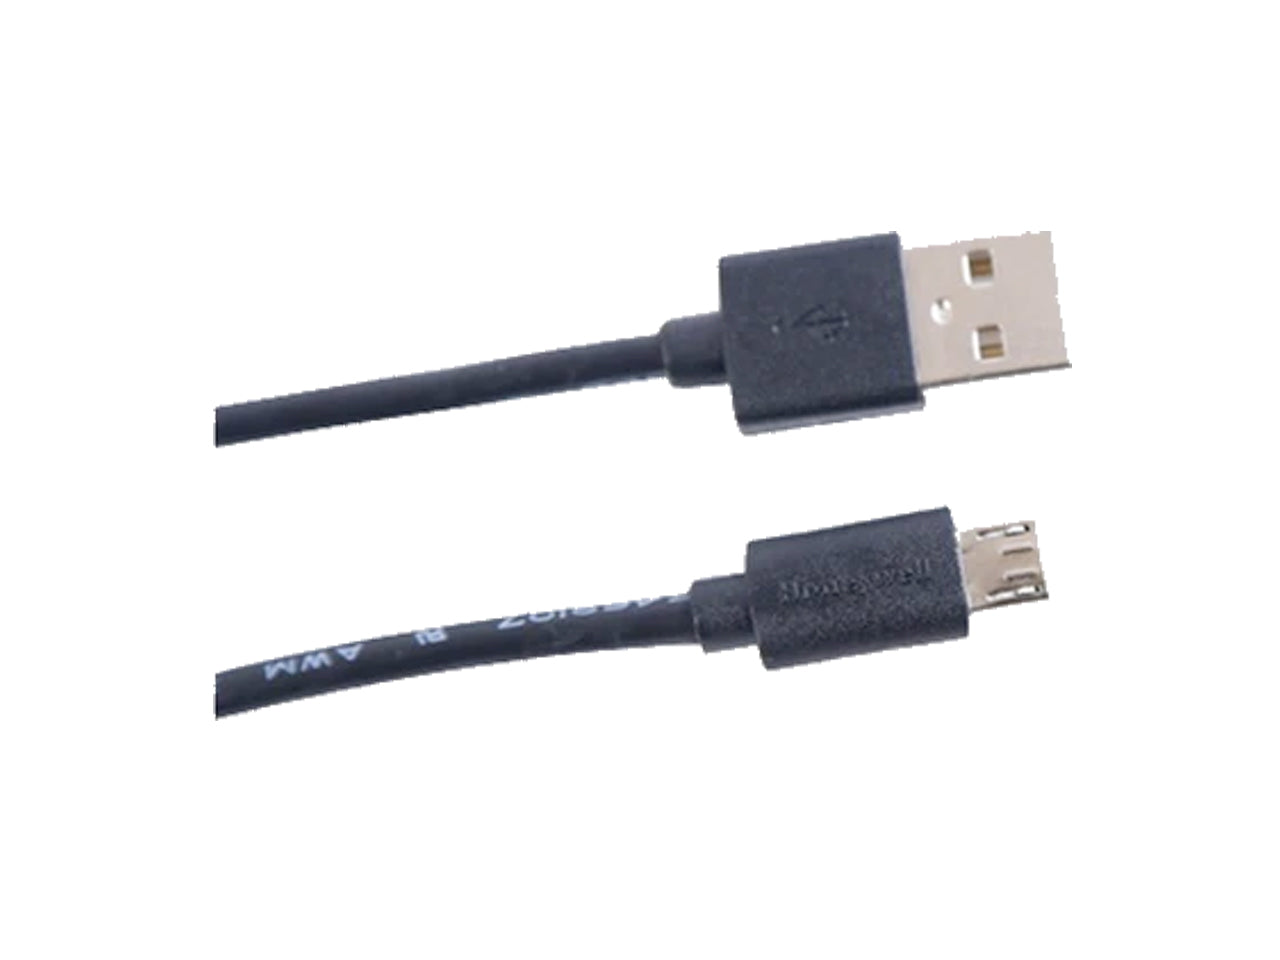 Honeywell USB to Micro USB Cable (Non-Braided) Black